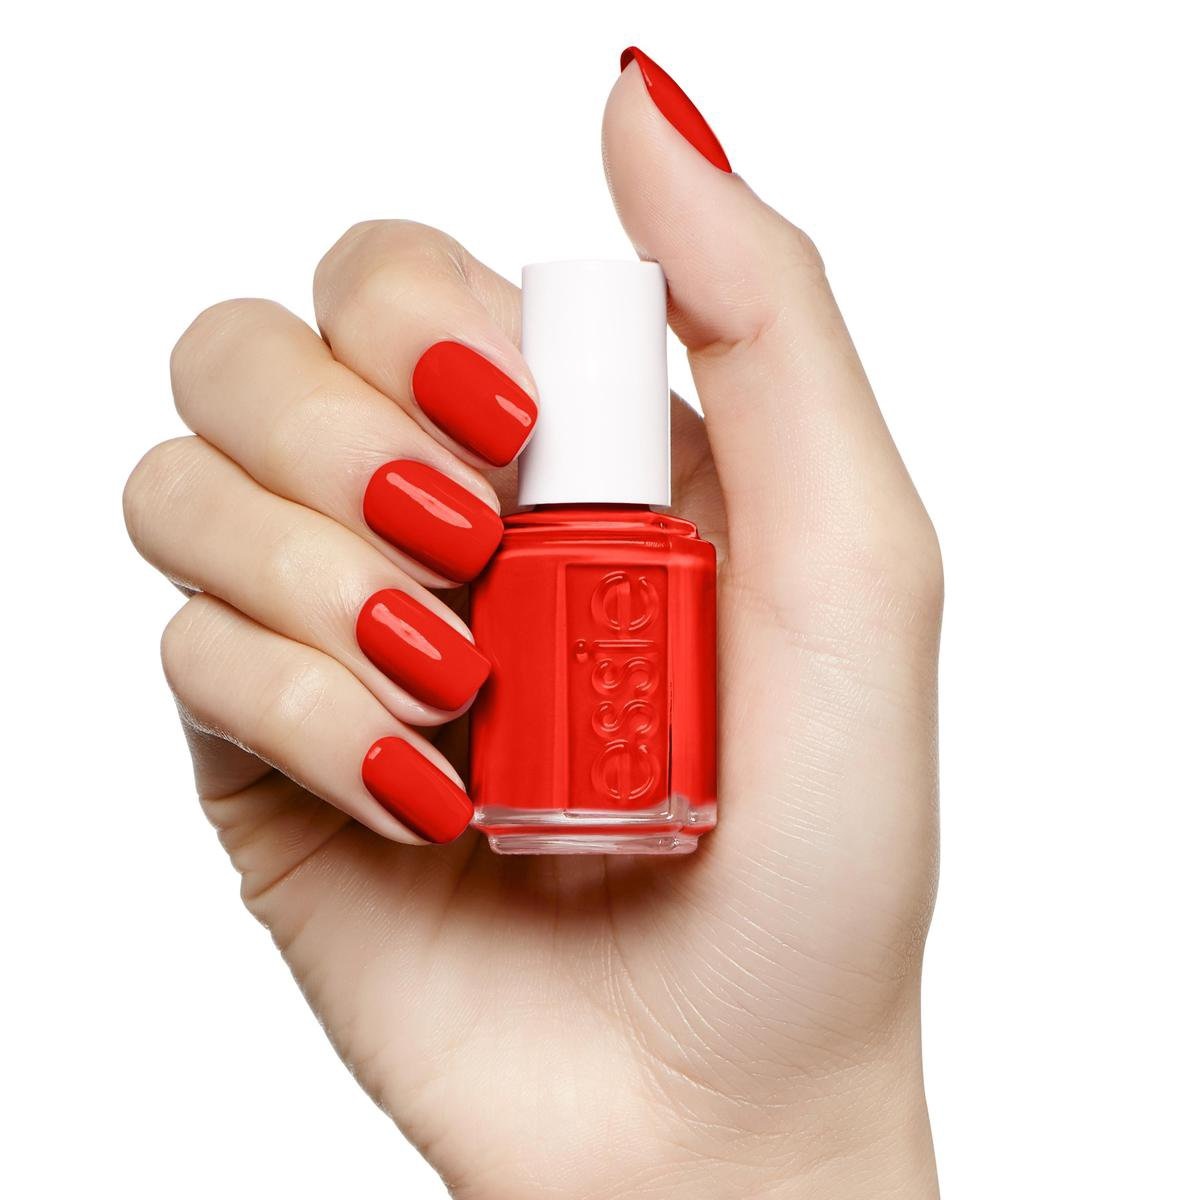 Essie Russian Roulette 61 - Rouge - Vernis à Ongles